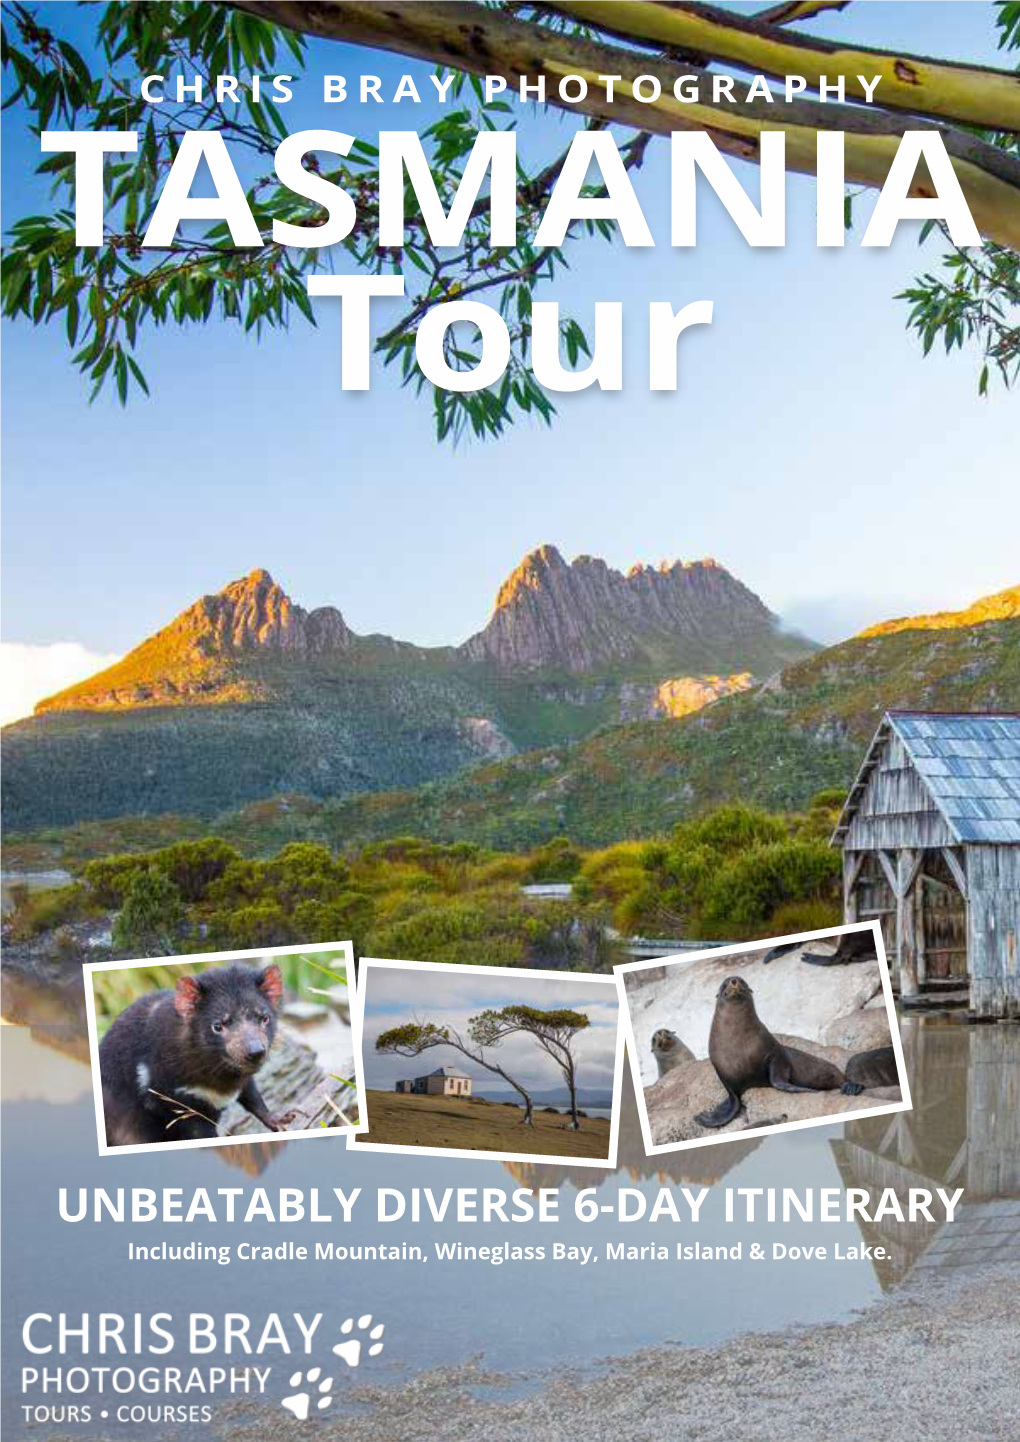 UNBEATABLY DIVERSE 6-DAY ITINERARY Including Cradle Mountain, Wineglass Bay, Maria Island & Dove Lake